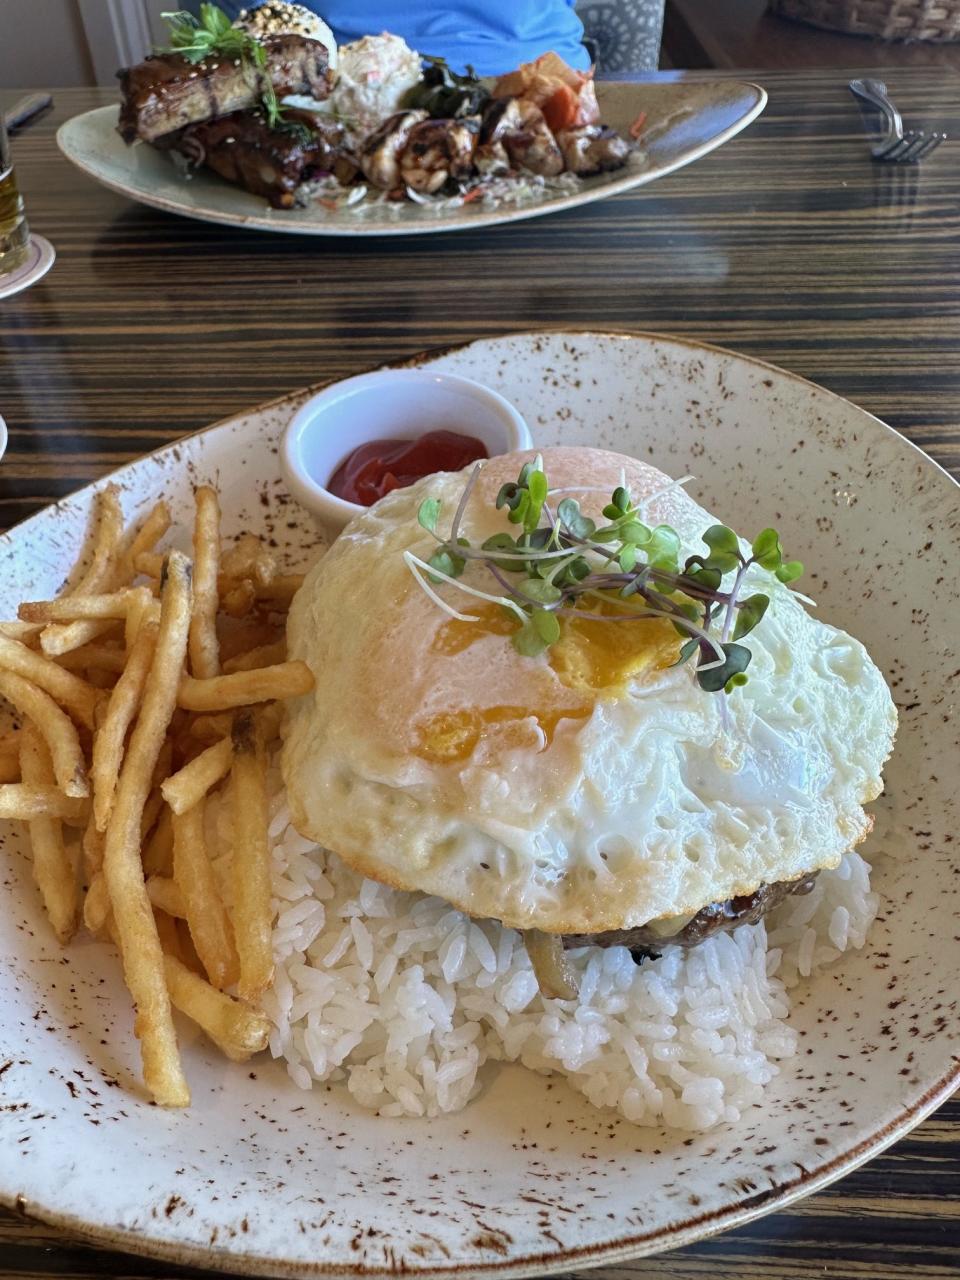 Loco Moco and The Plate Lunch are served at most every local resturant. (Adam Schupak/Golfweek)